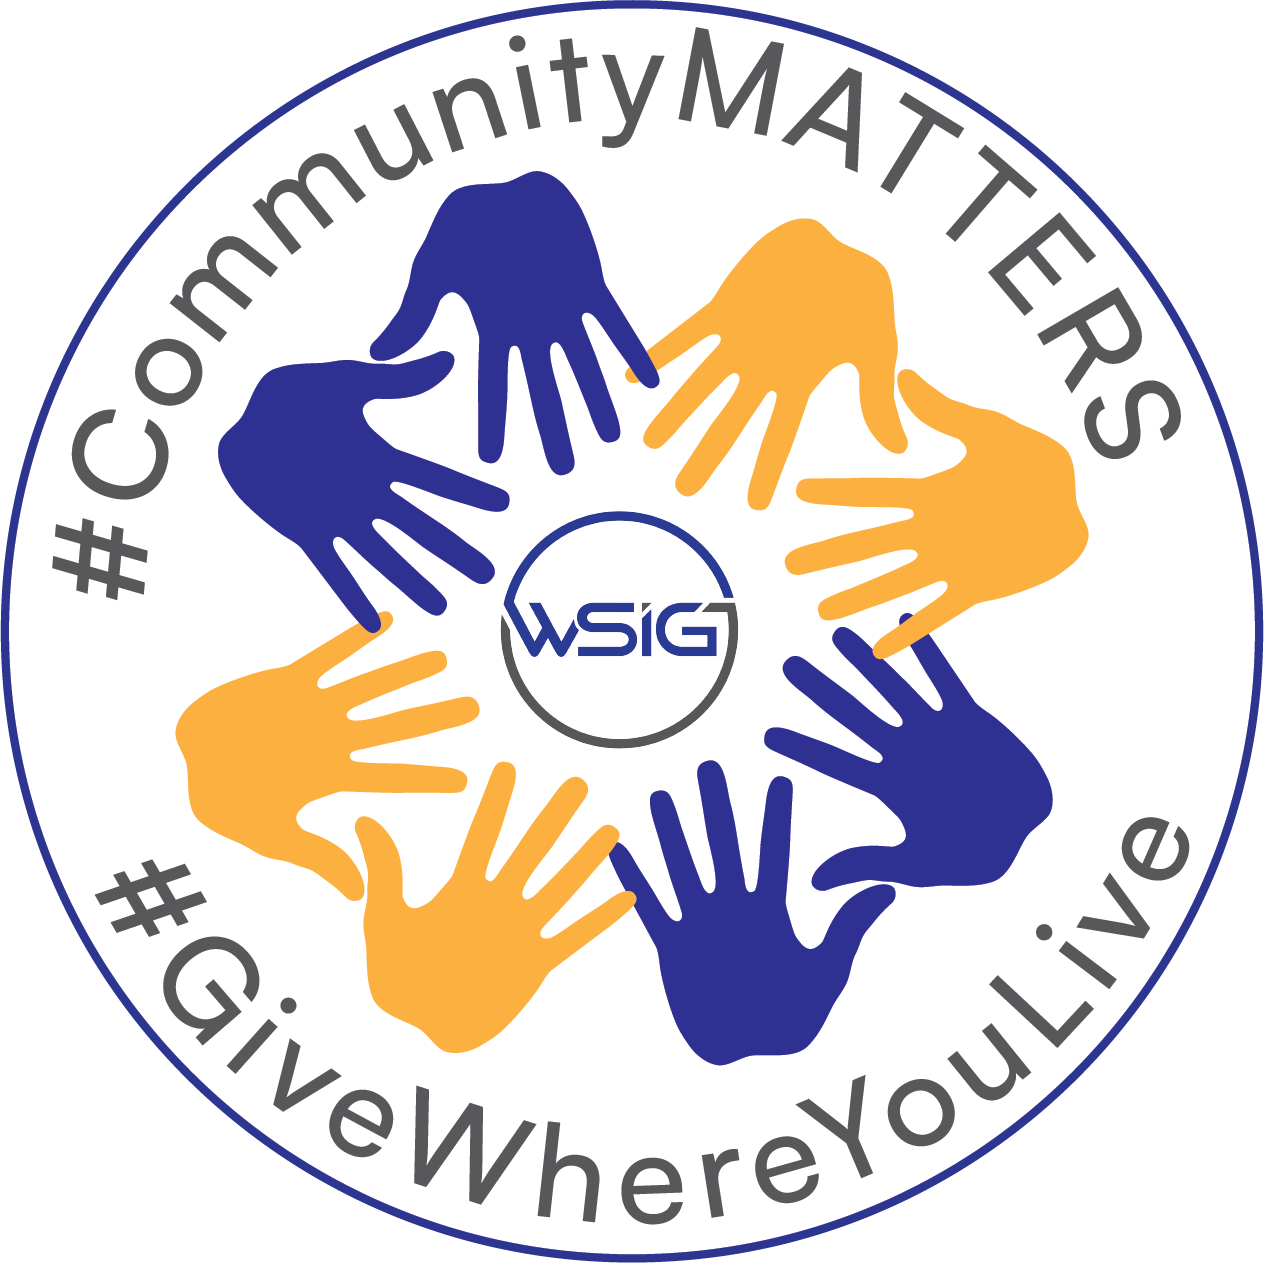 A logo that says community matters # give where you live